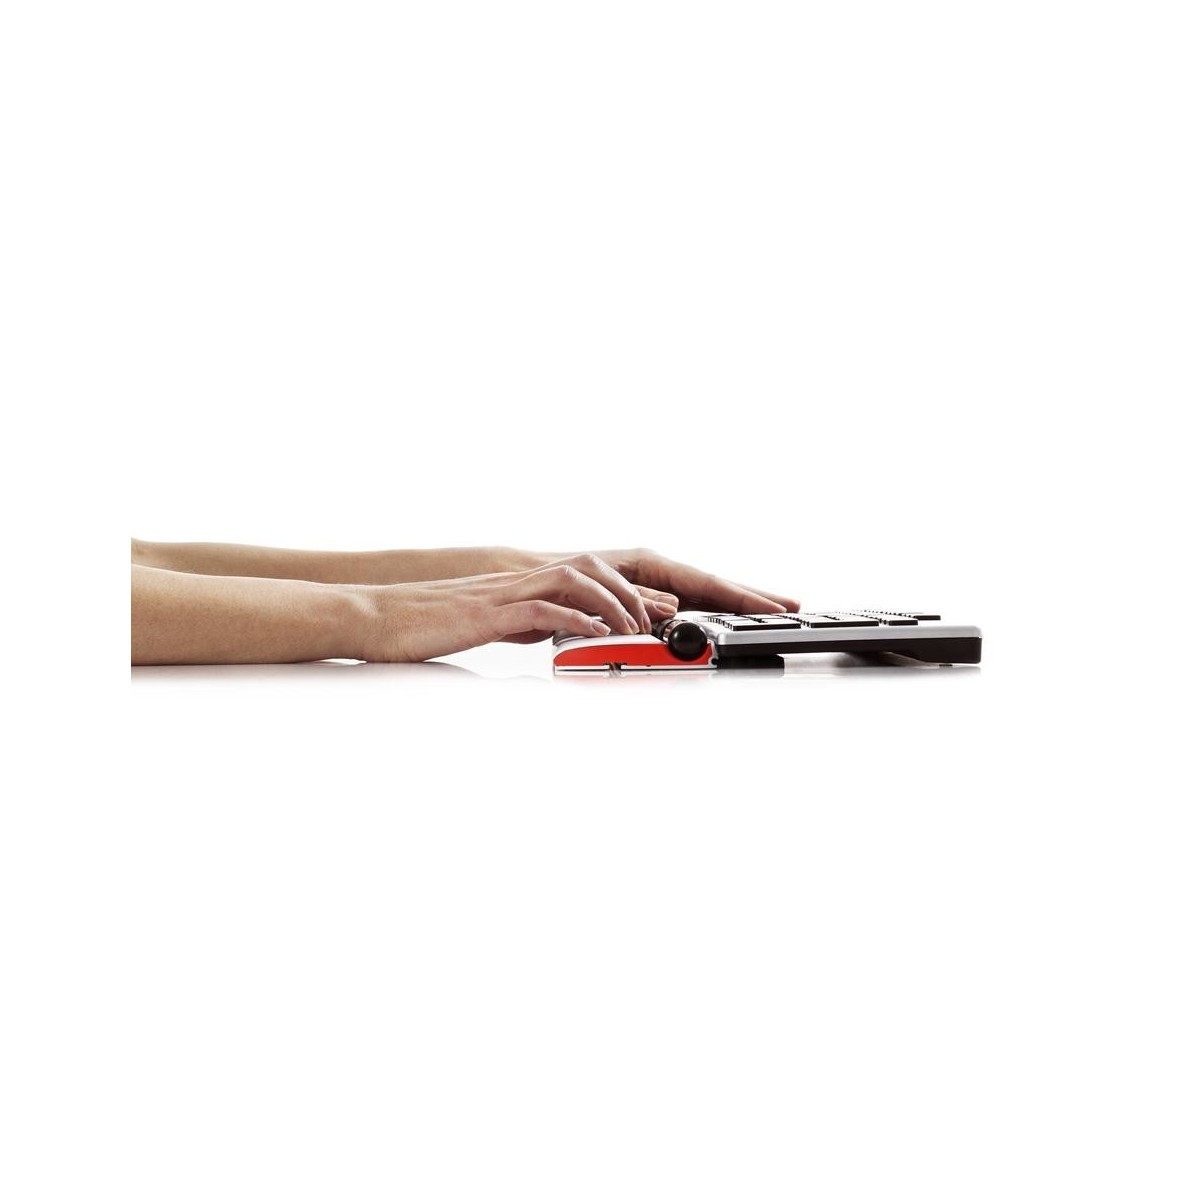 Contour Design RollerMouse Red - Ambidextrous - Laser - USB Type-A - 2400 DPI - Black,Red,White